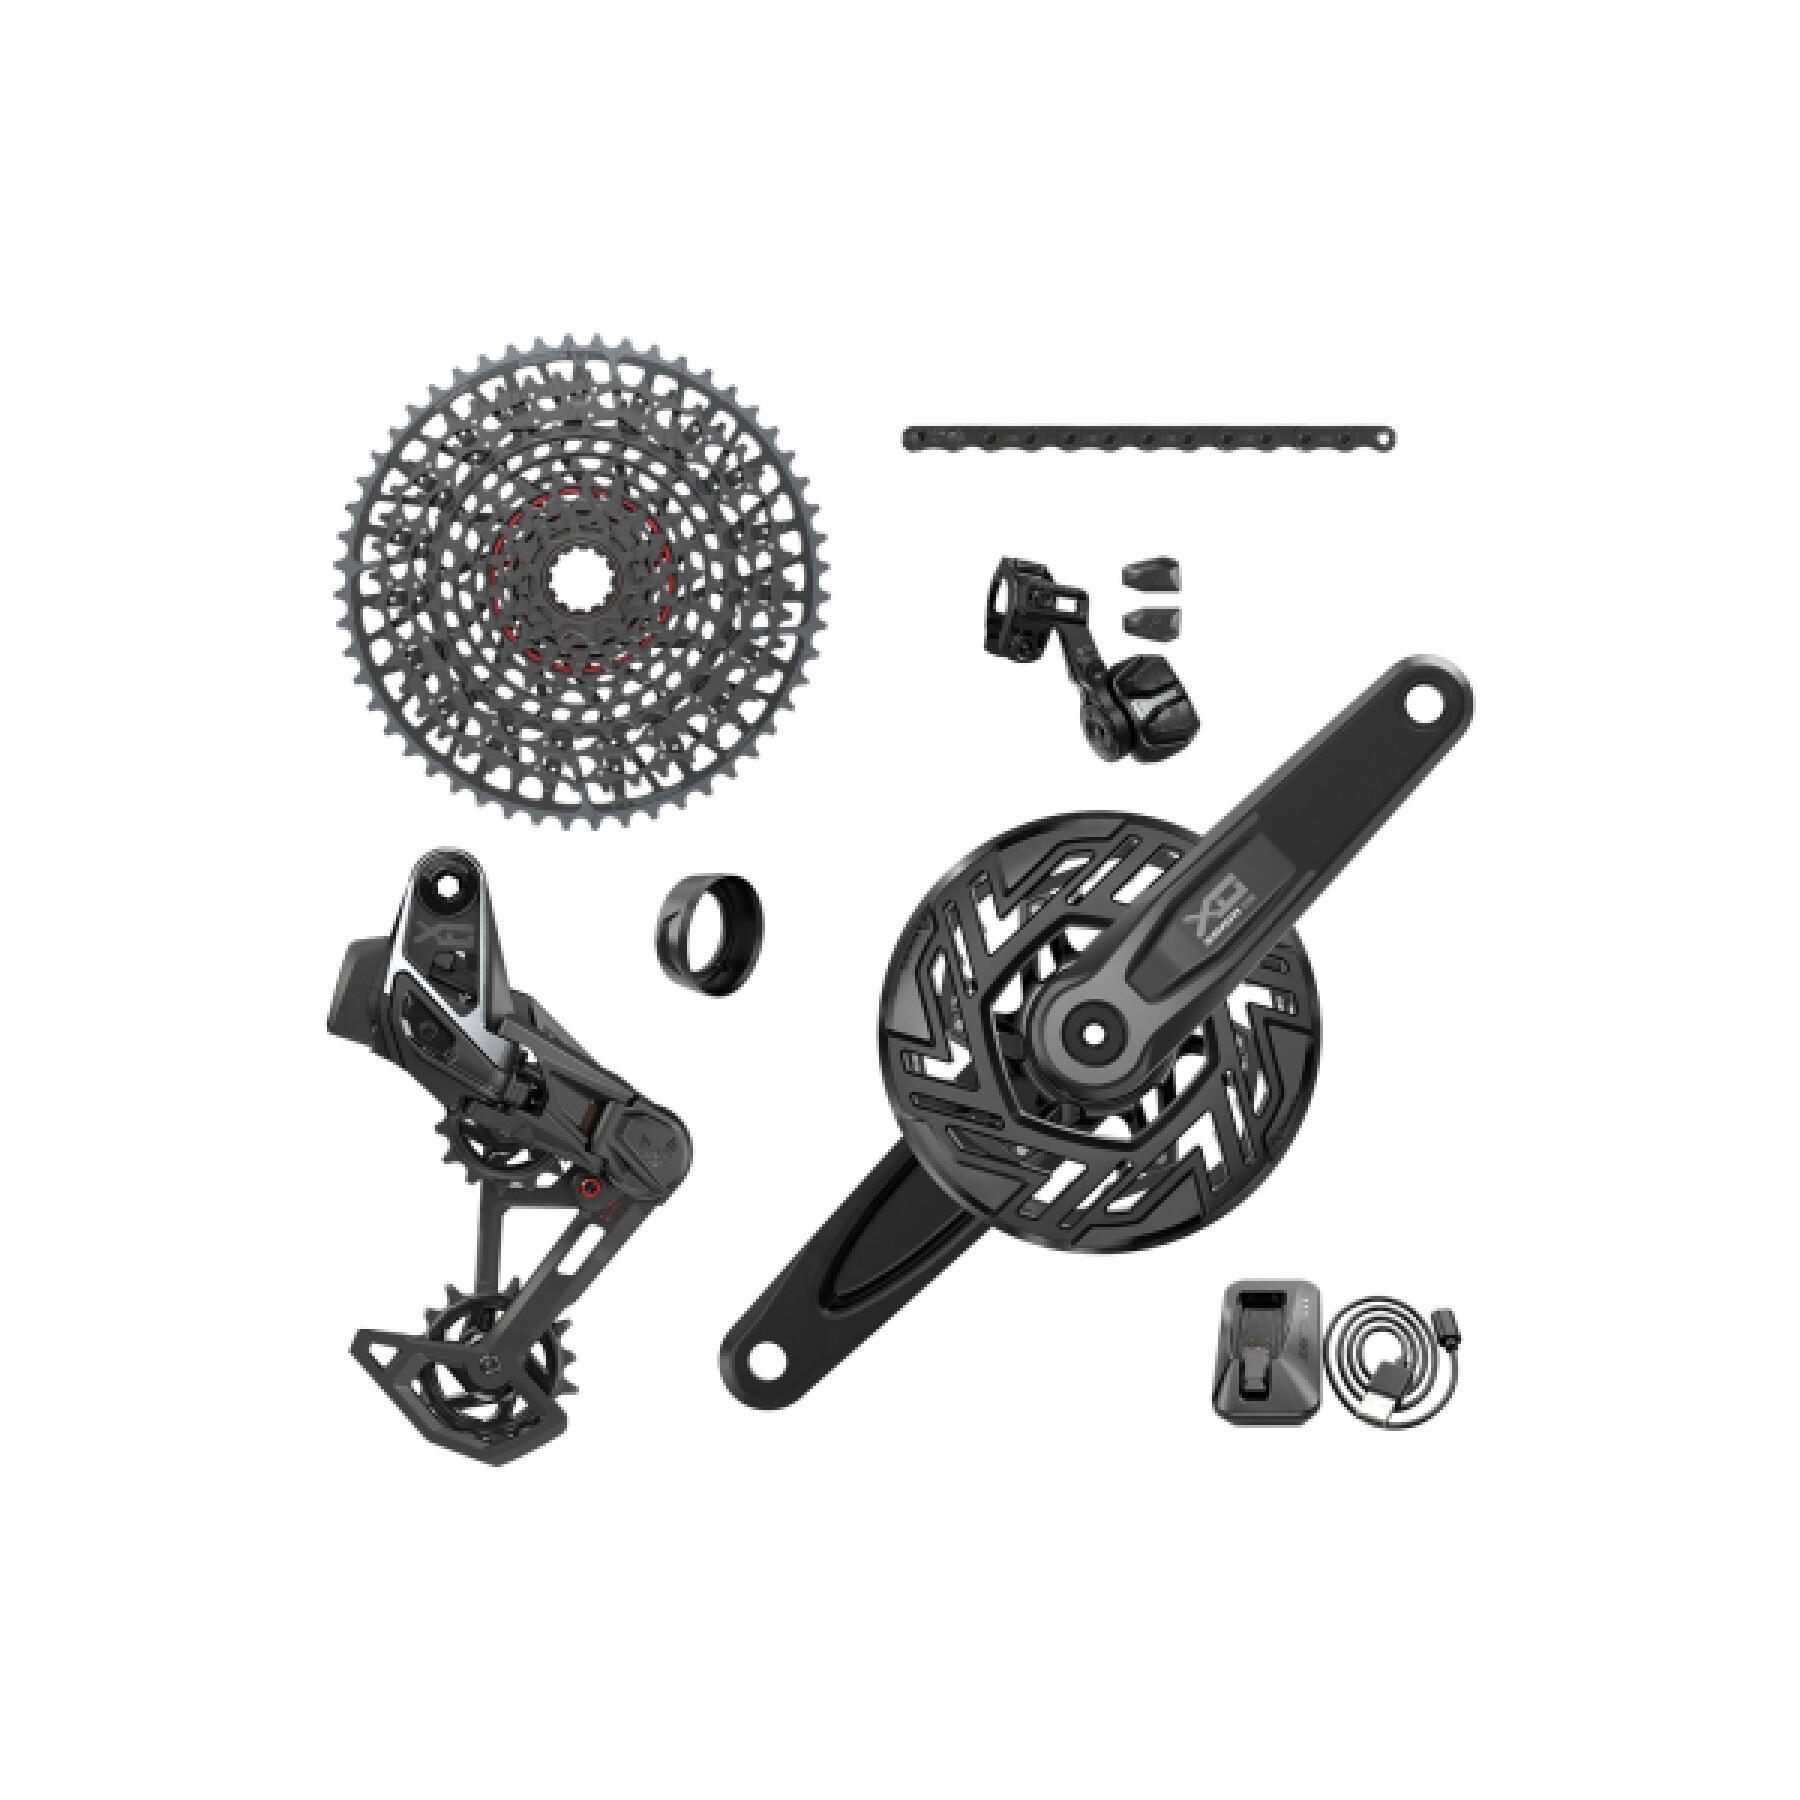 Paquete completo para bicicleta brose axs t-type clip-on Sram X0 ISIS 36DTS 160 10/52